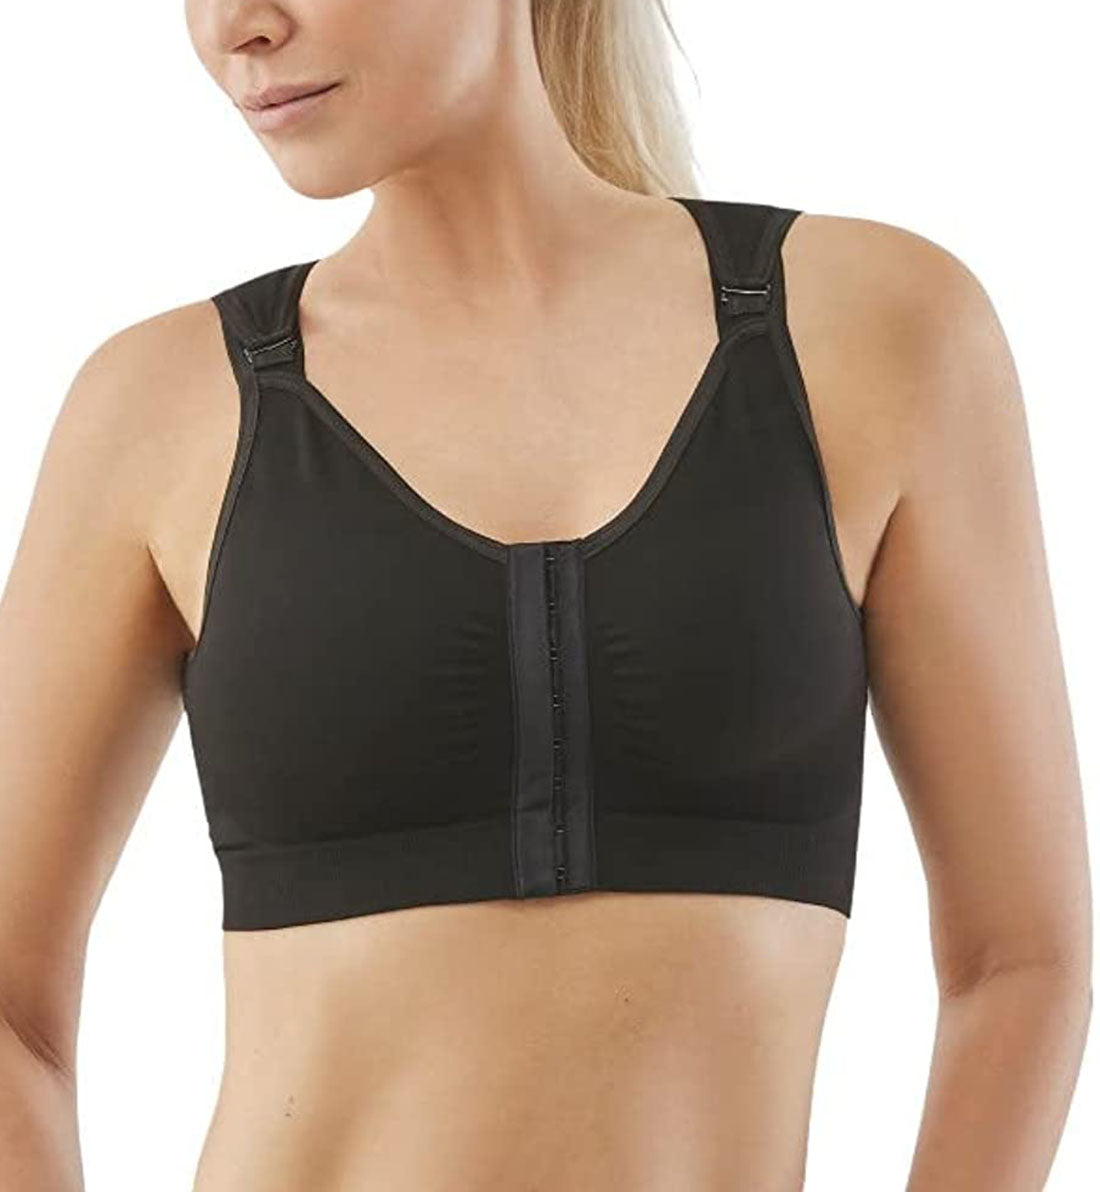 Carefix Bree Post-Op Wire Free Front Close Recovery Bra (3831),Small,Black - Black,Small